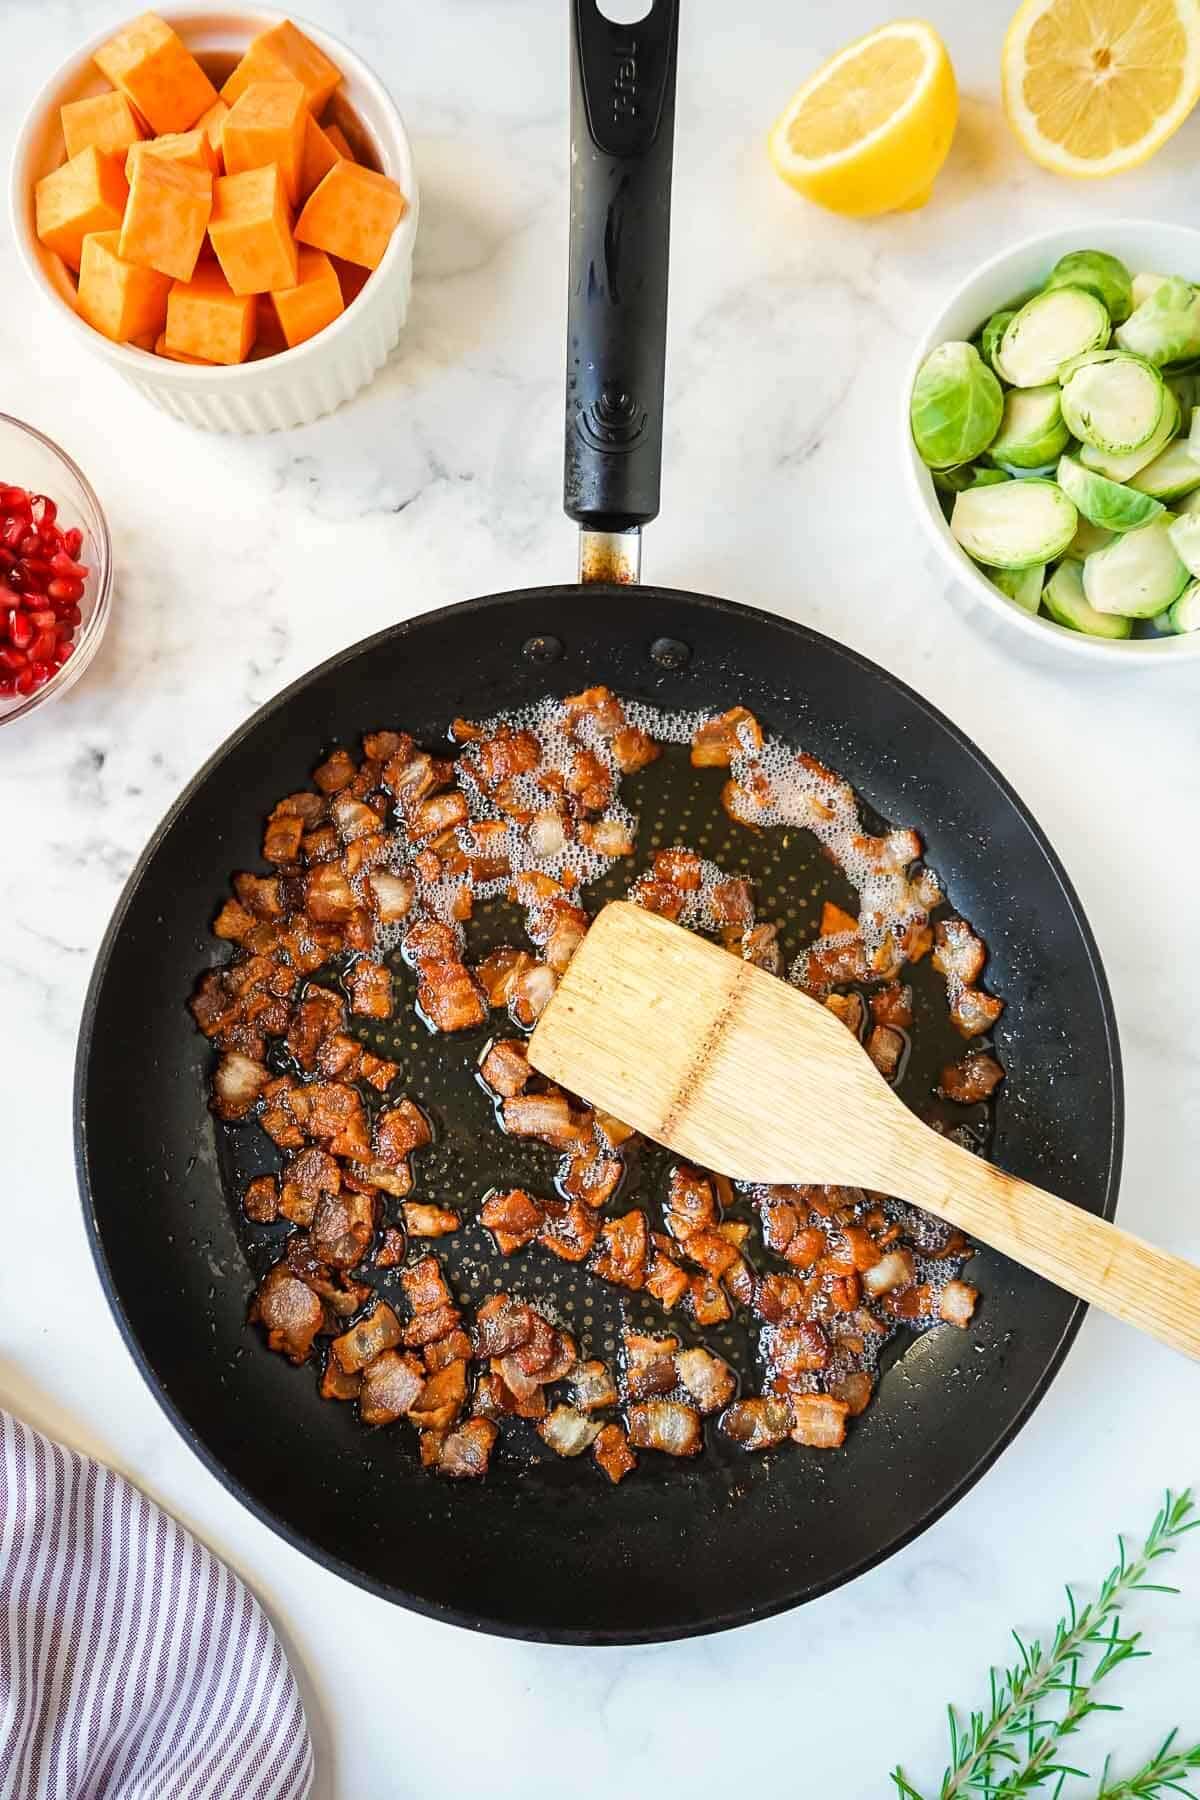 Small bacon pieces frying in a black skillet.